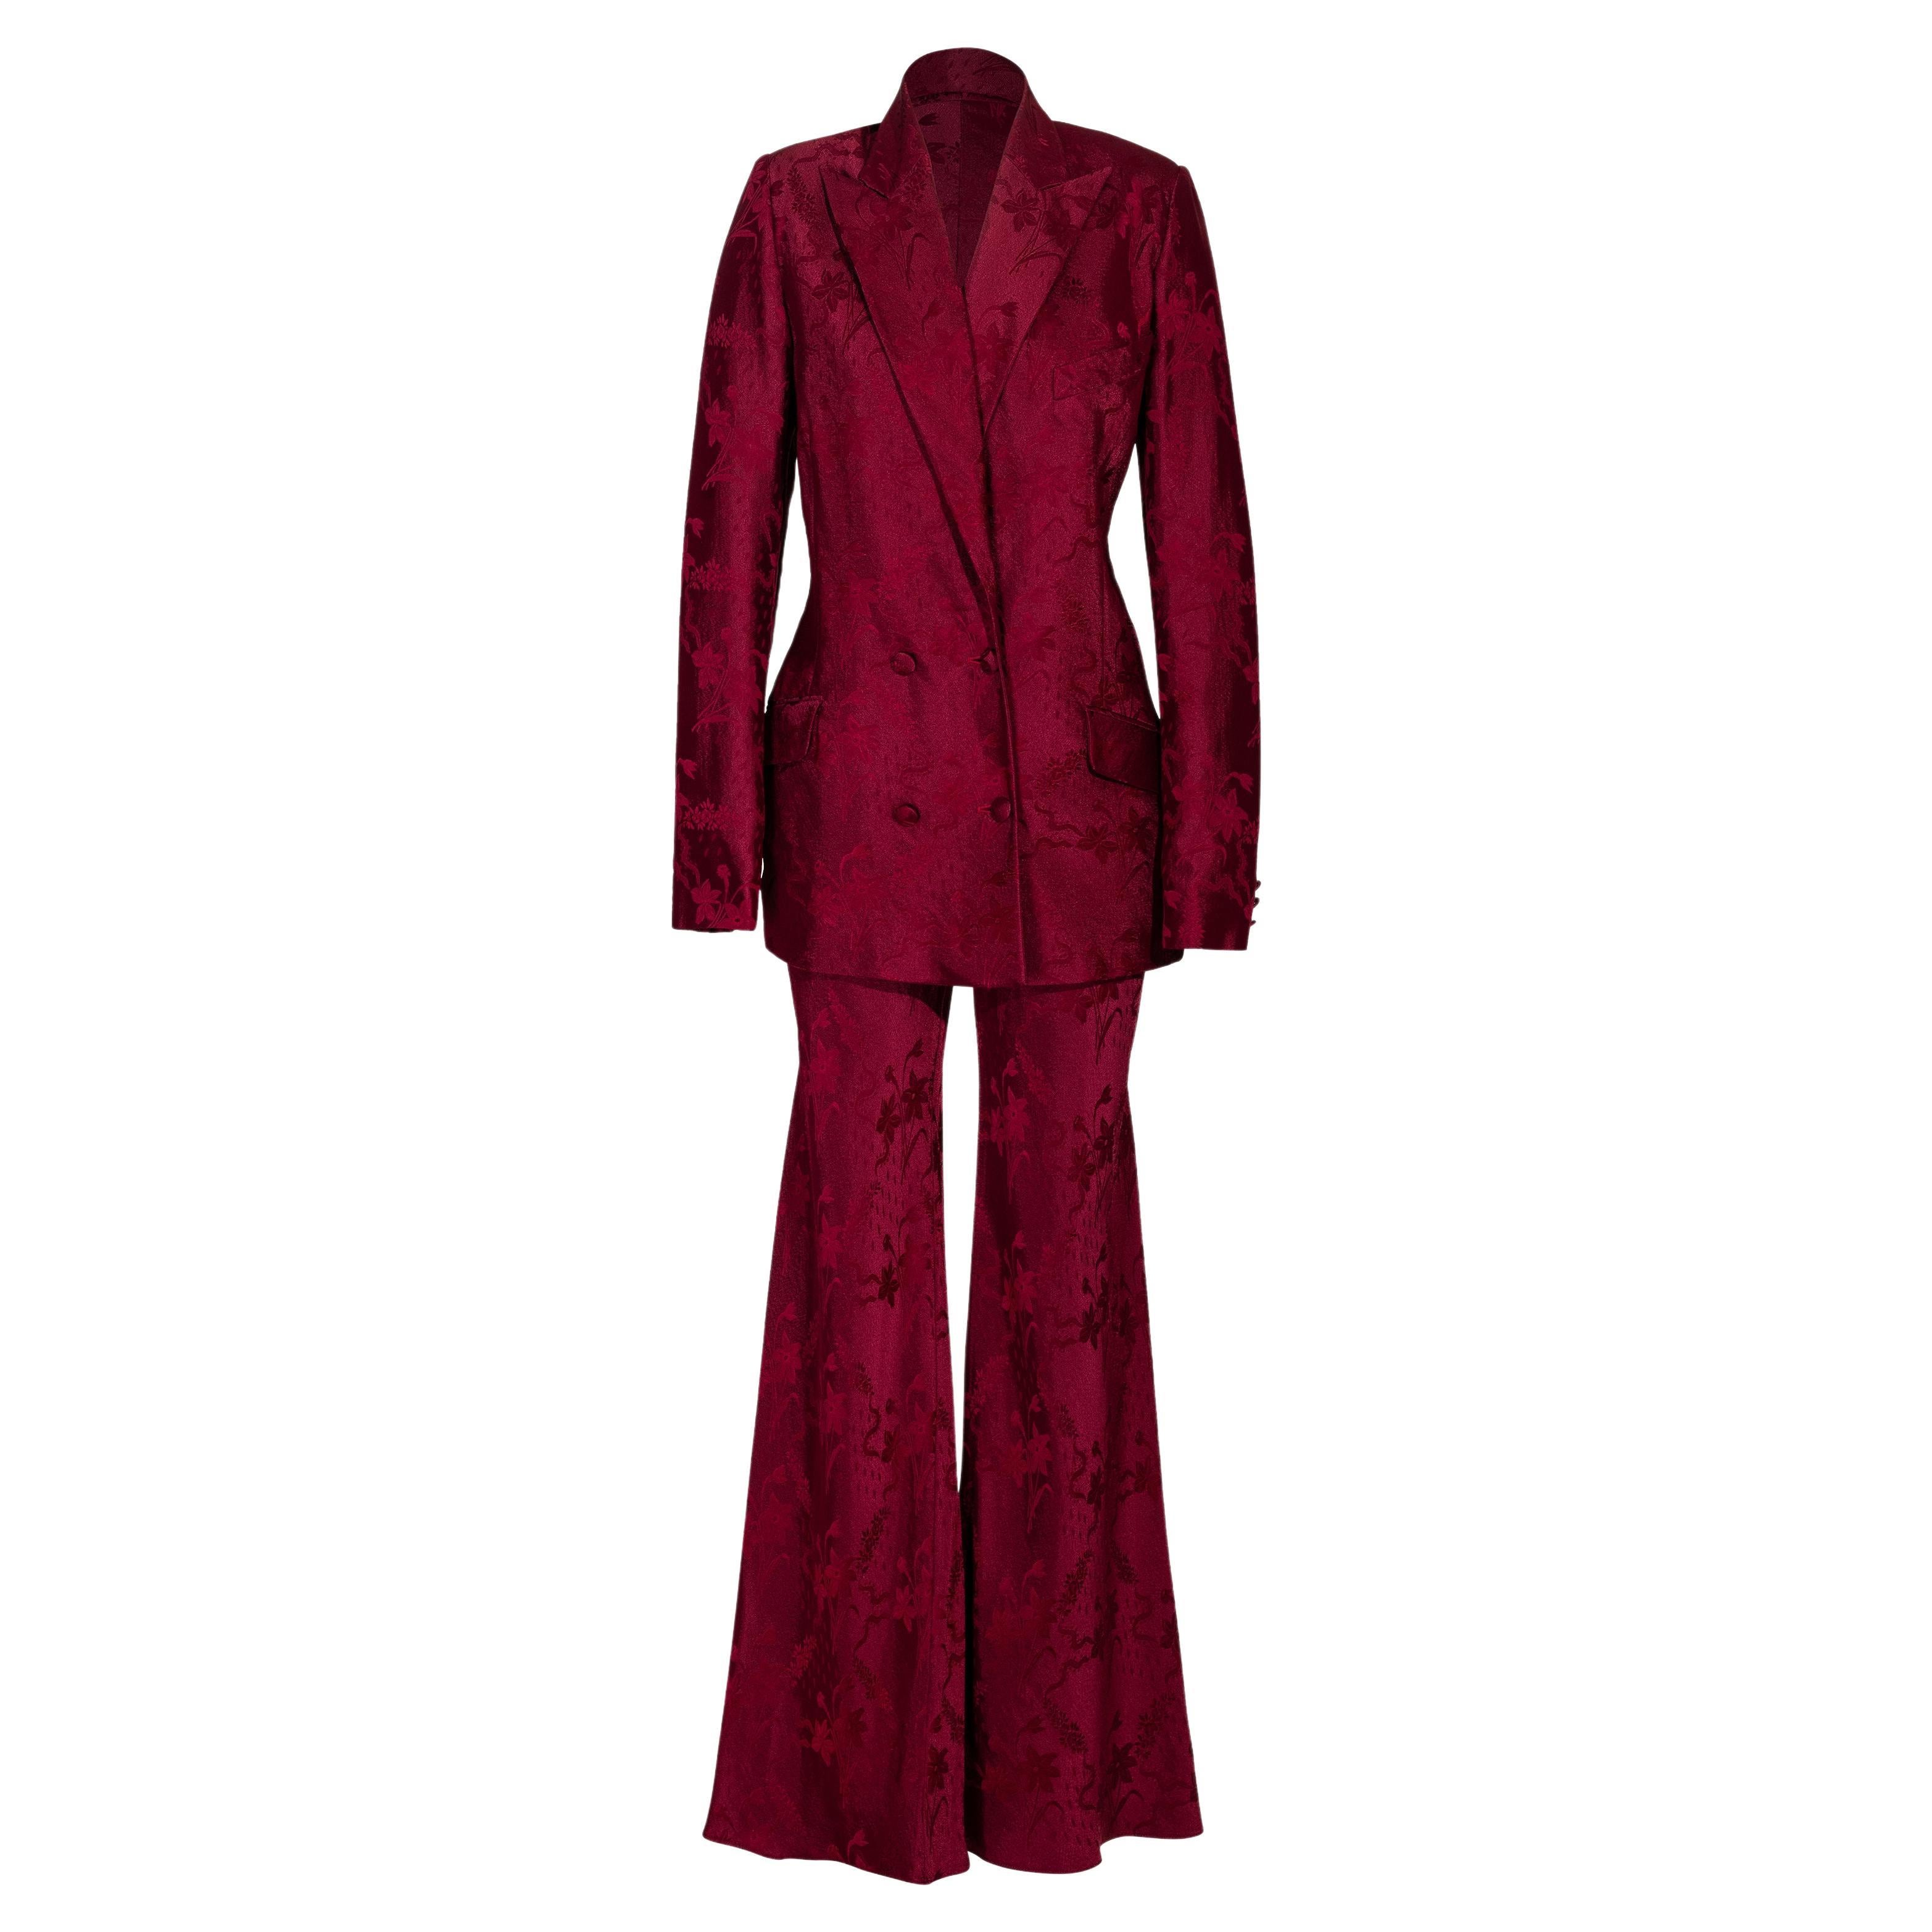 S/S 1998 John Galliano Deep Red Floral Pattern Pant Suit Set